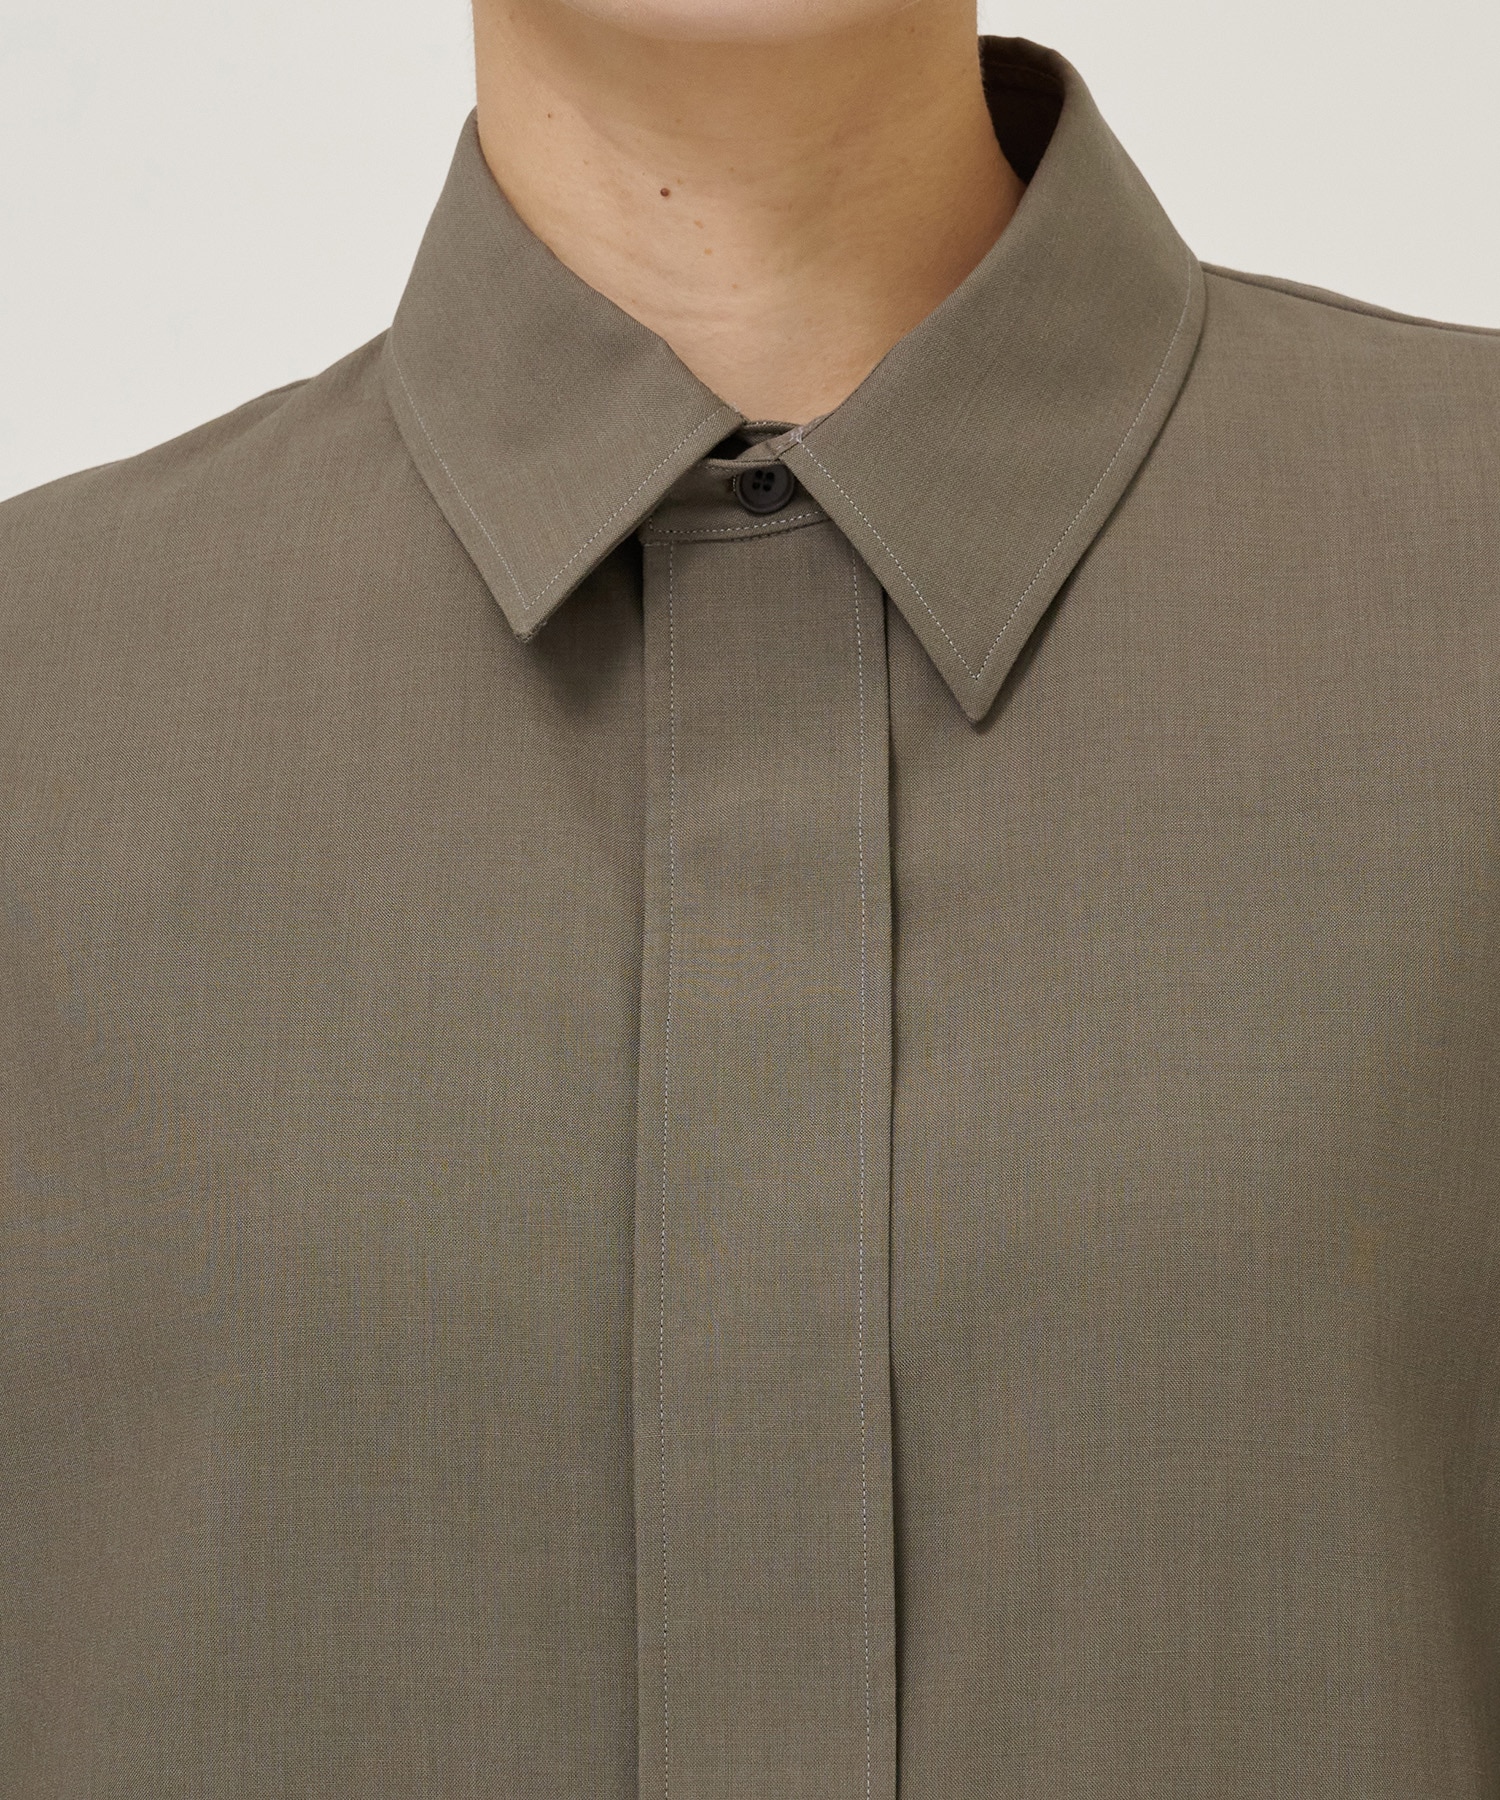 THE PERFECT HALF SLEEVE SHIRT THE RERACS